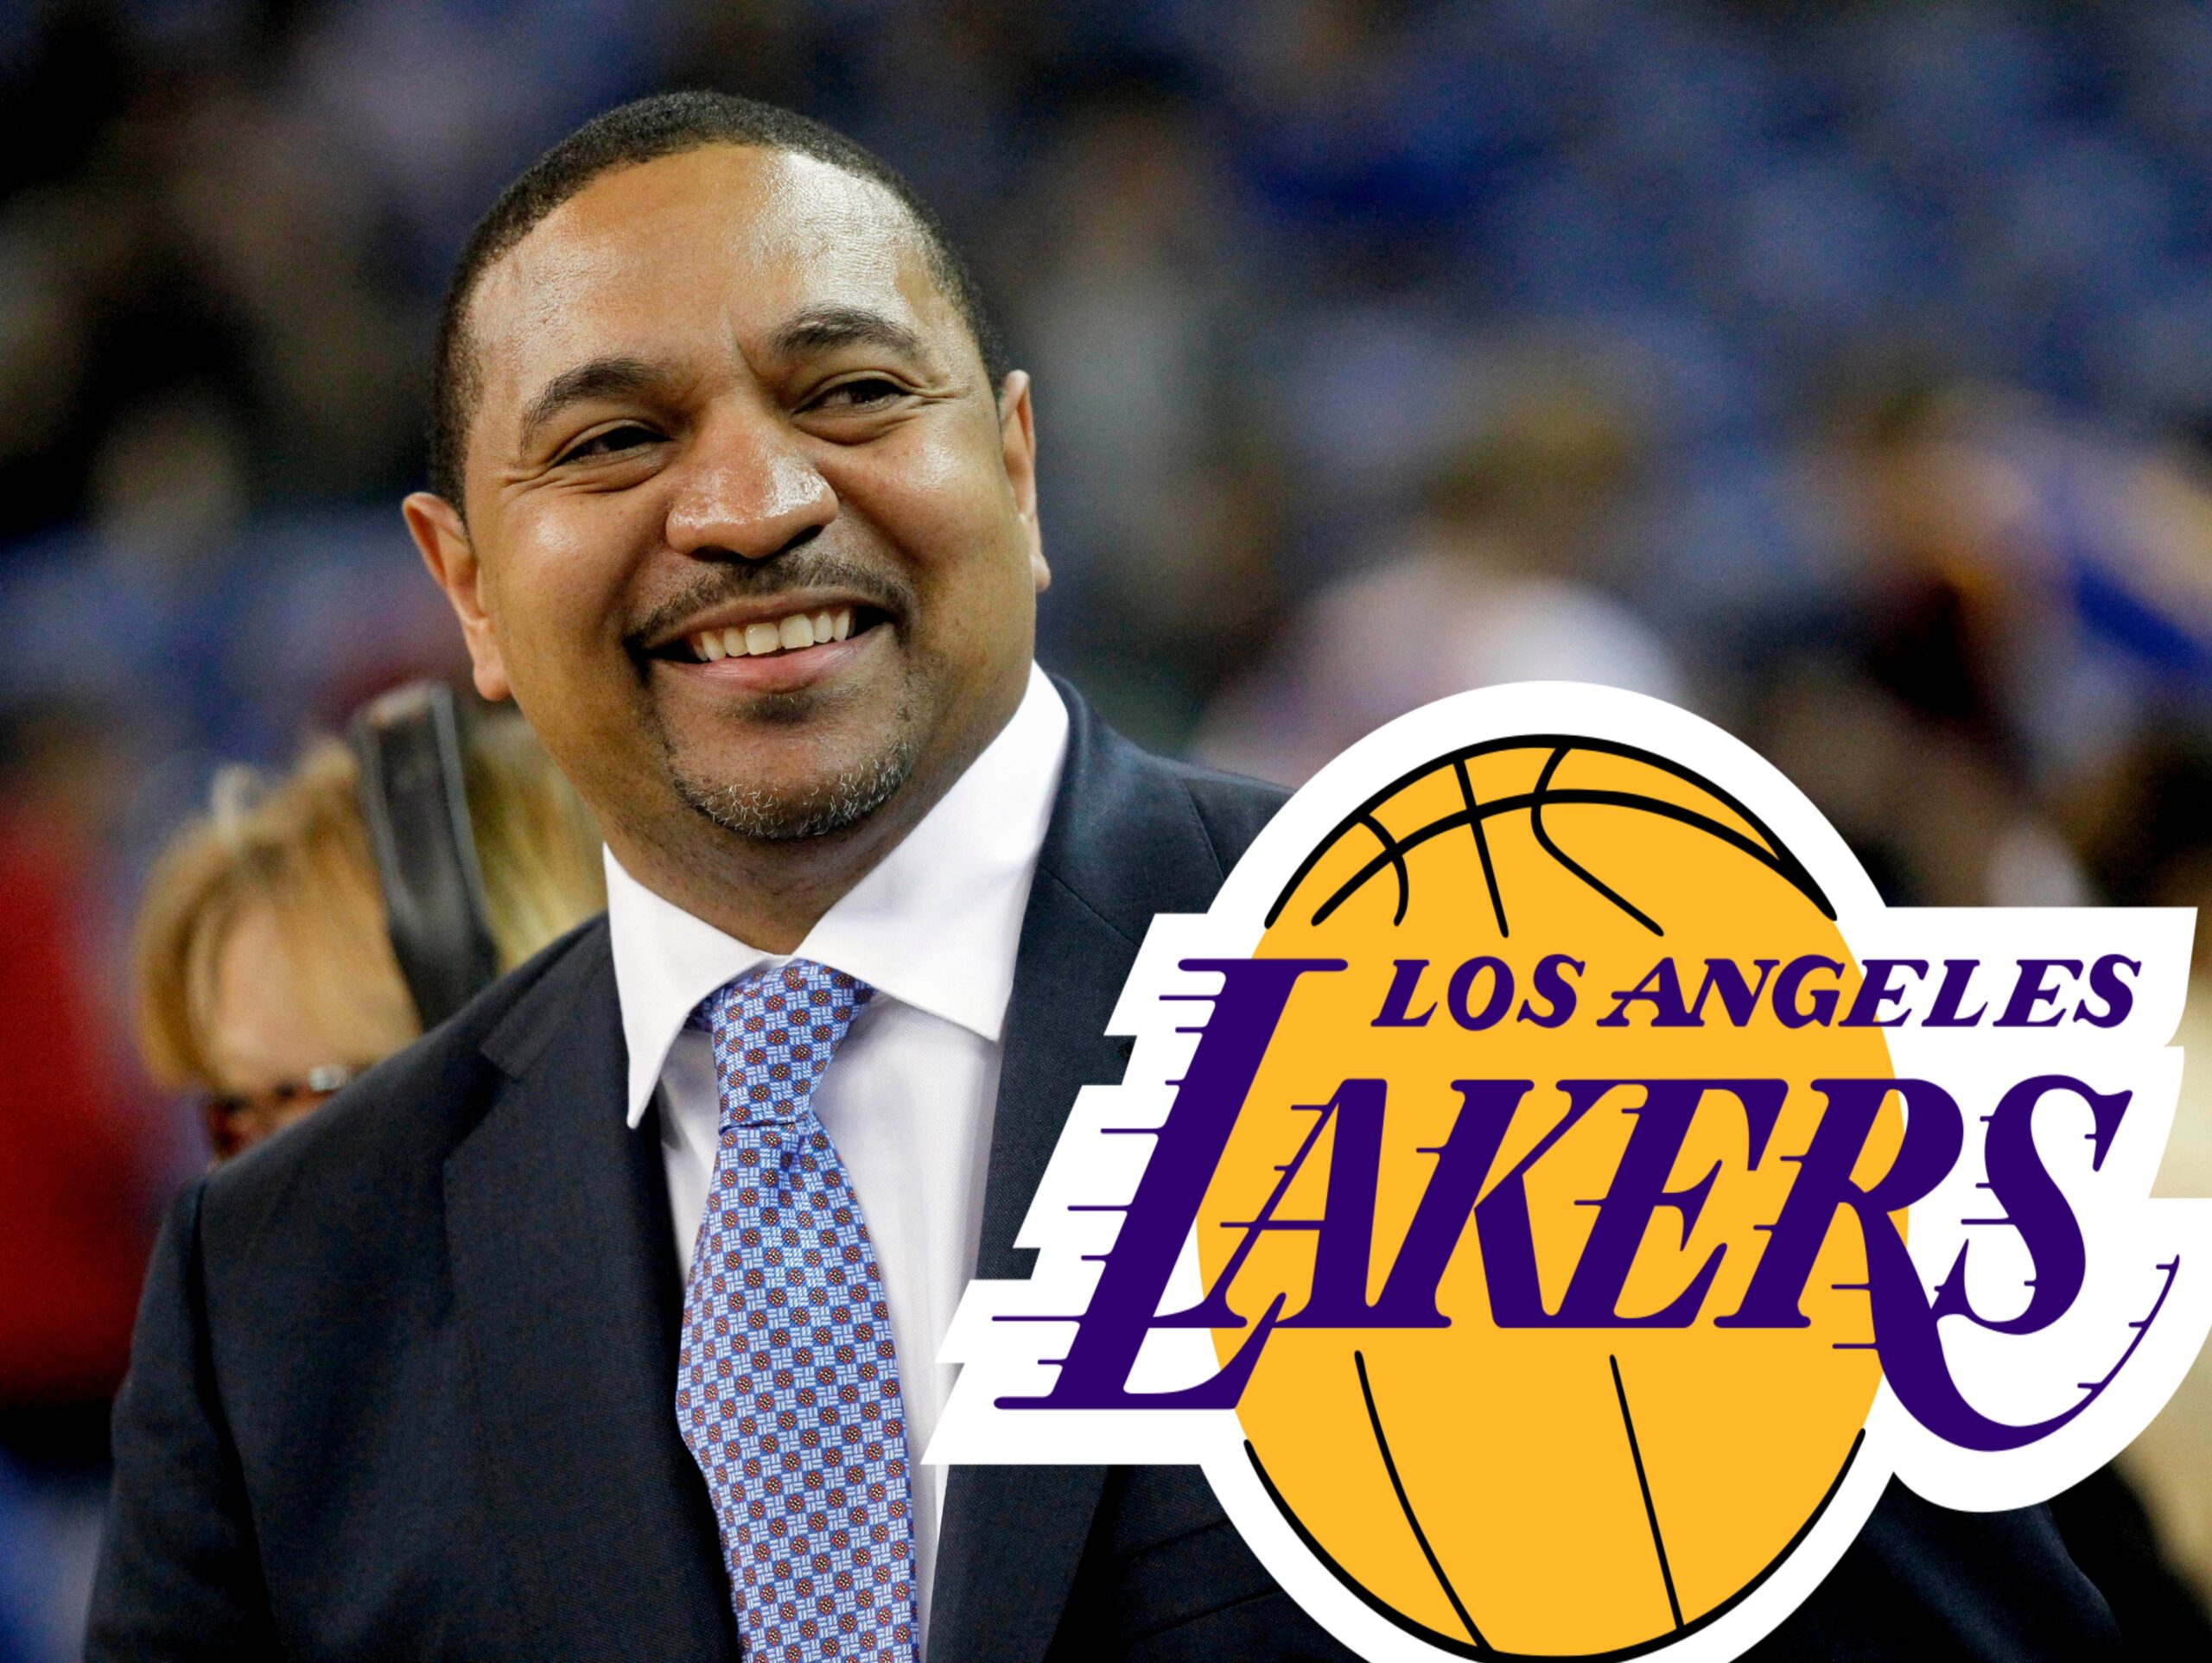 ESPN REPORT: MARK JACKSON AS BEING WELCOME IN THE NEW HE… see.. more….